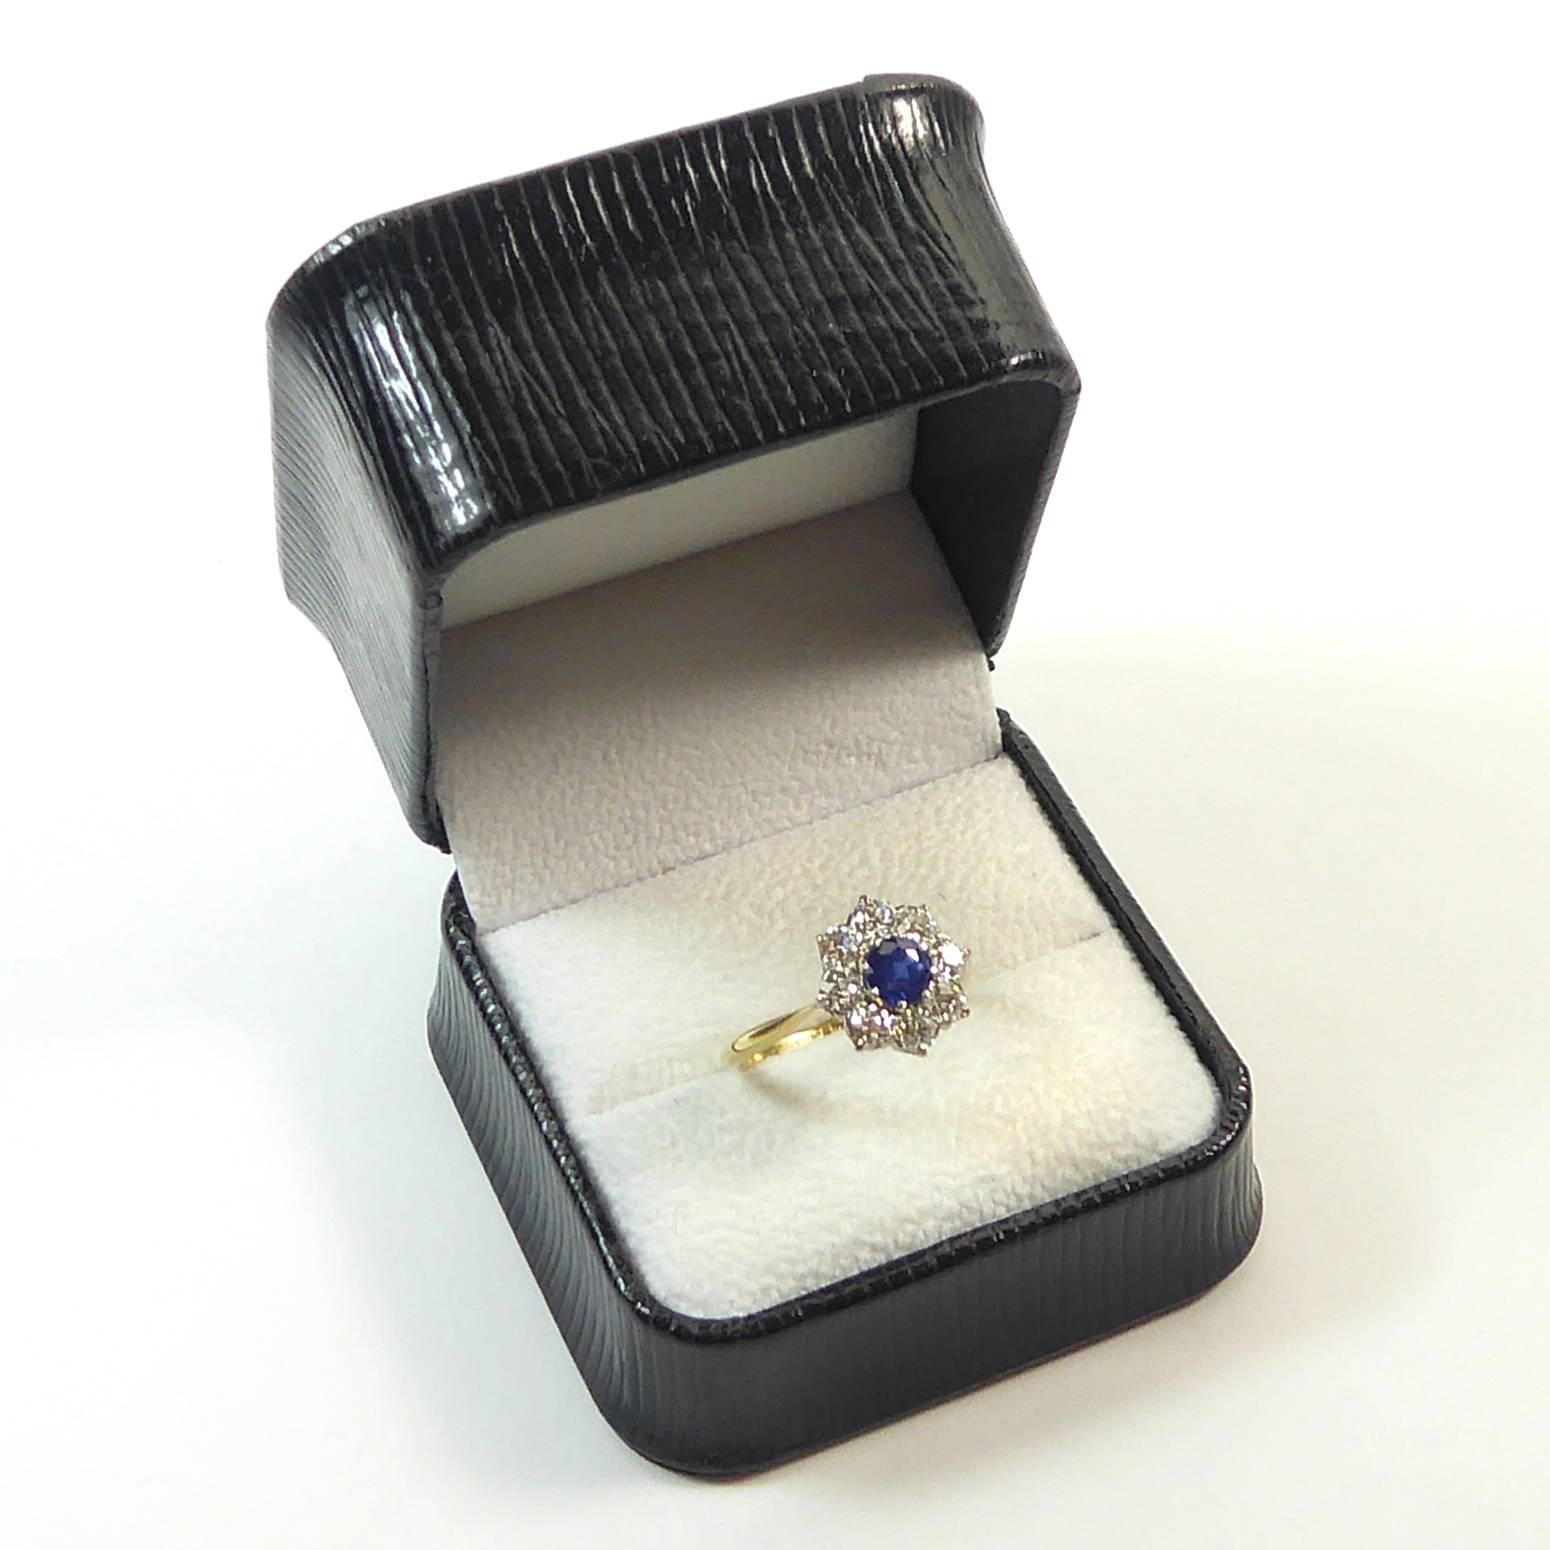 Women's Vintage Sapphire and Diamond Cluster Engagement Ring, Old European Cut Diamonds 